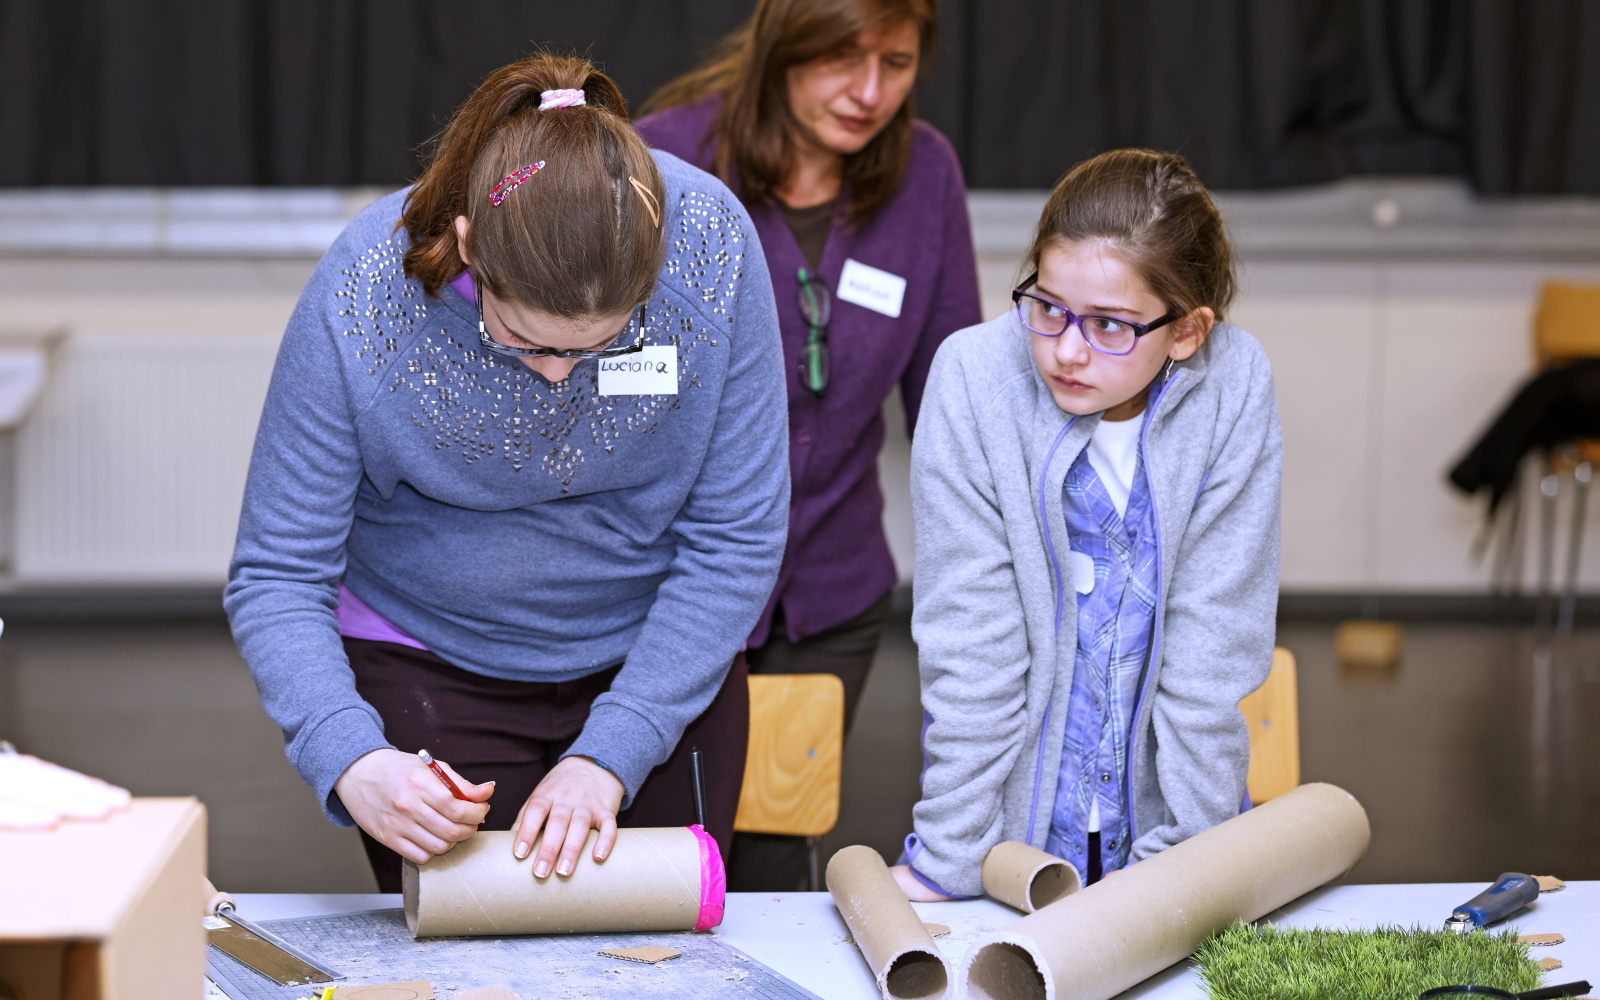 Two girls are standing in front of a table with cardboard-rolls. One of them is marking the roll in front of her with a pencil.